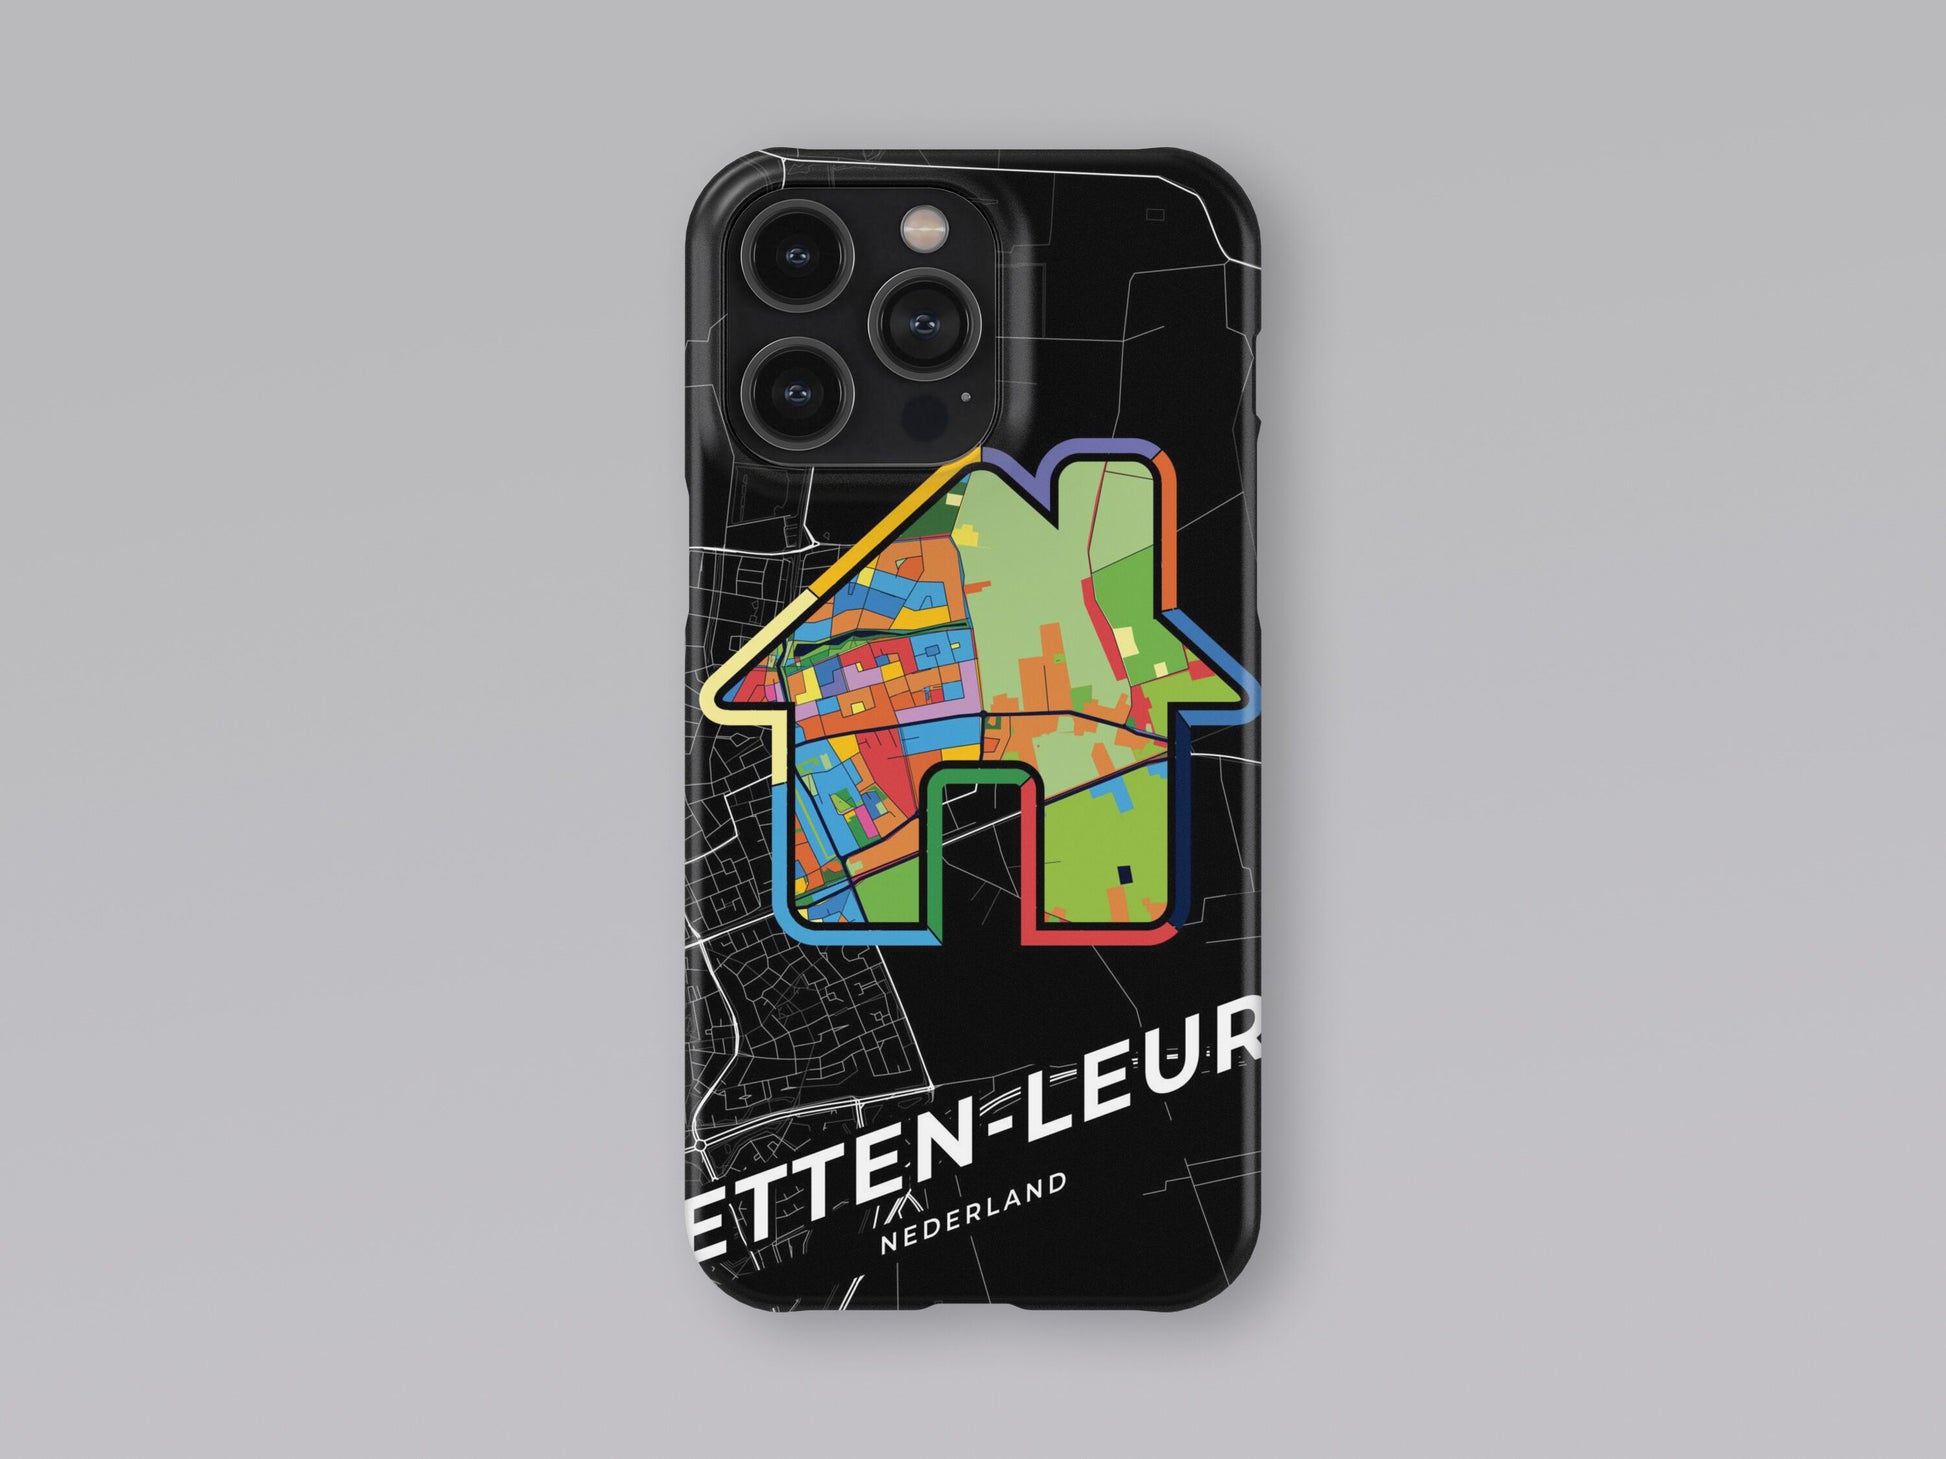 Etten-Leur Netherlands slim phone case with colorful icon. Birthday, wedding or housewarming gift. Couple match cases. 3